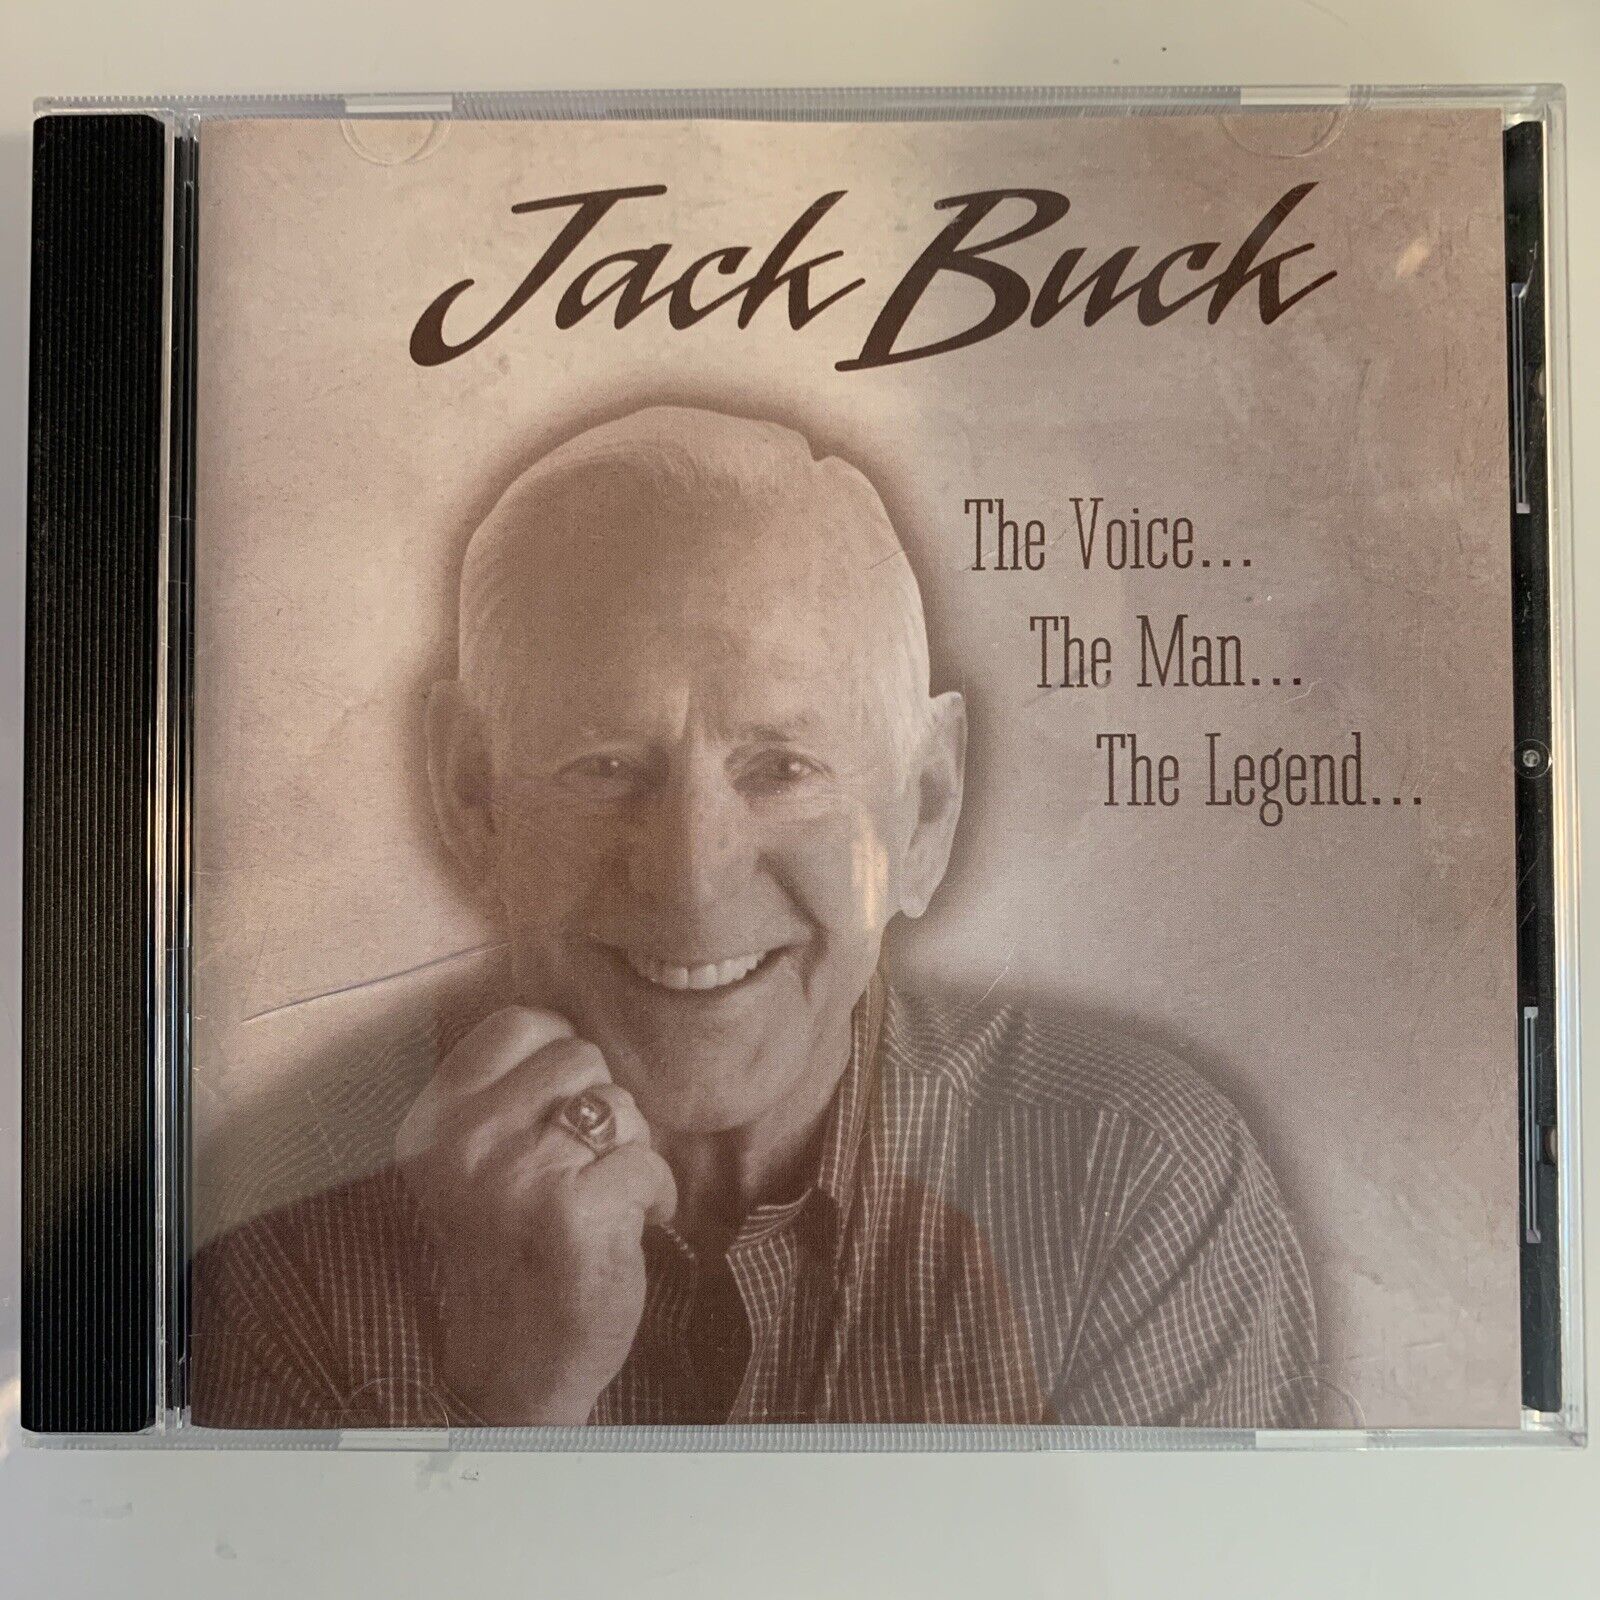 The Voice... The Man... The Legend... by Jack Buck CD KMOX